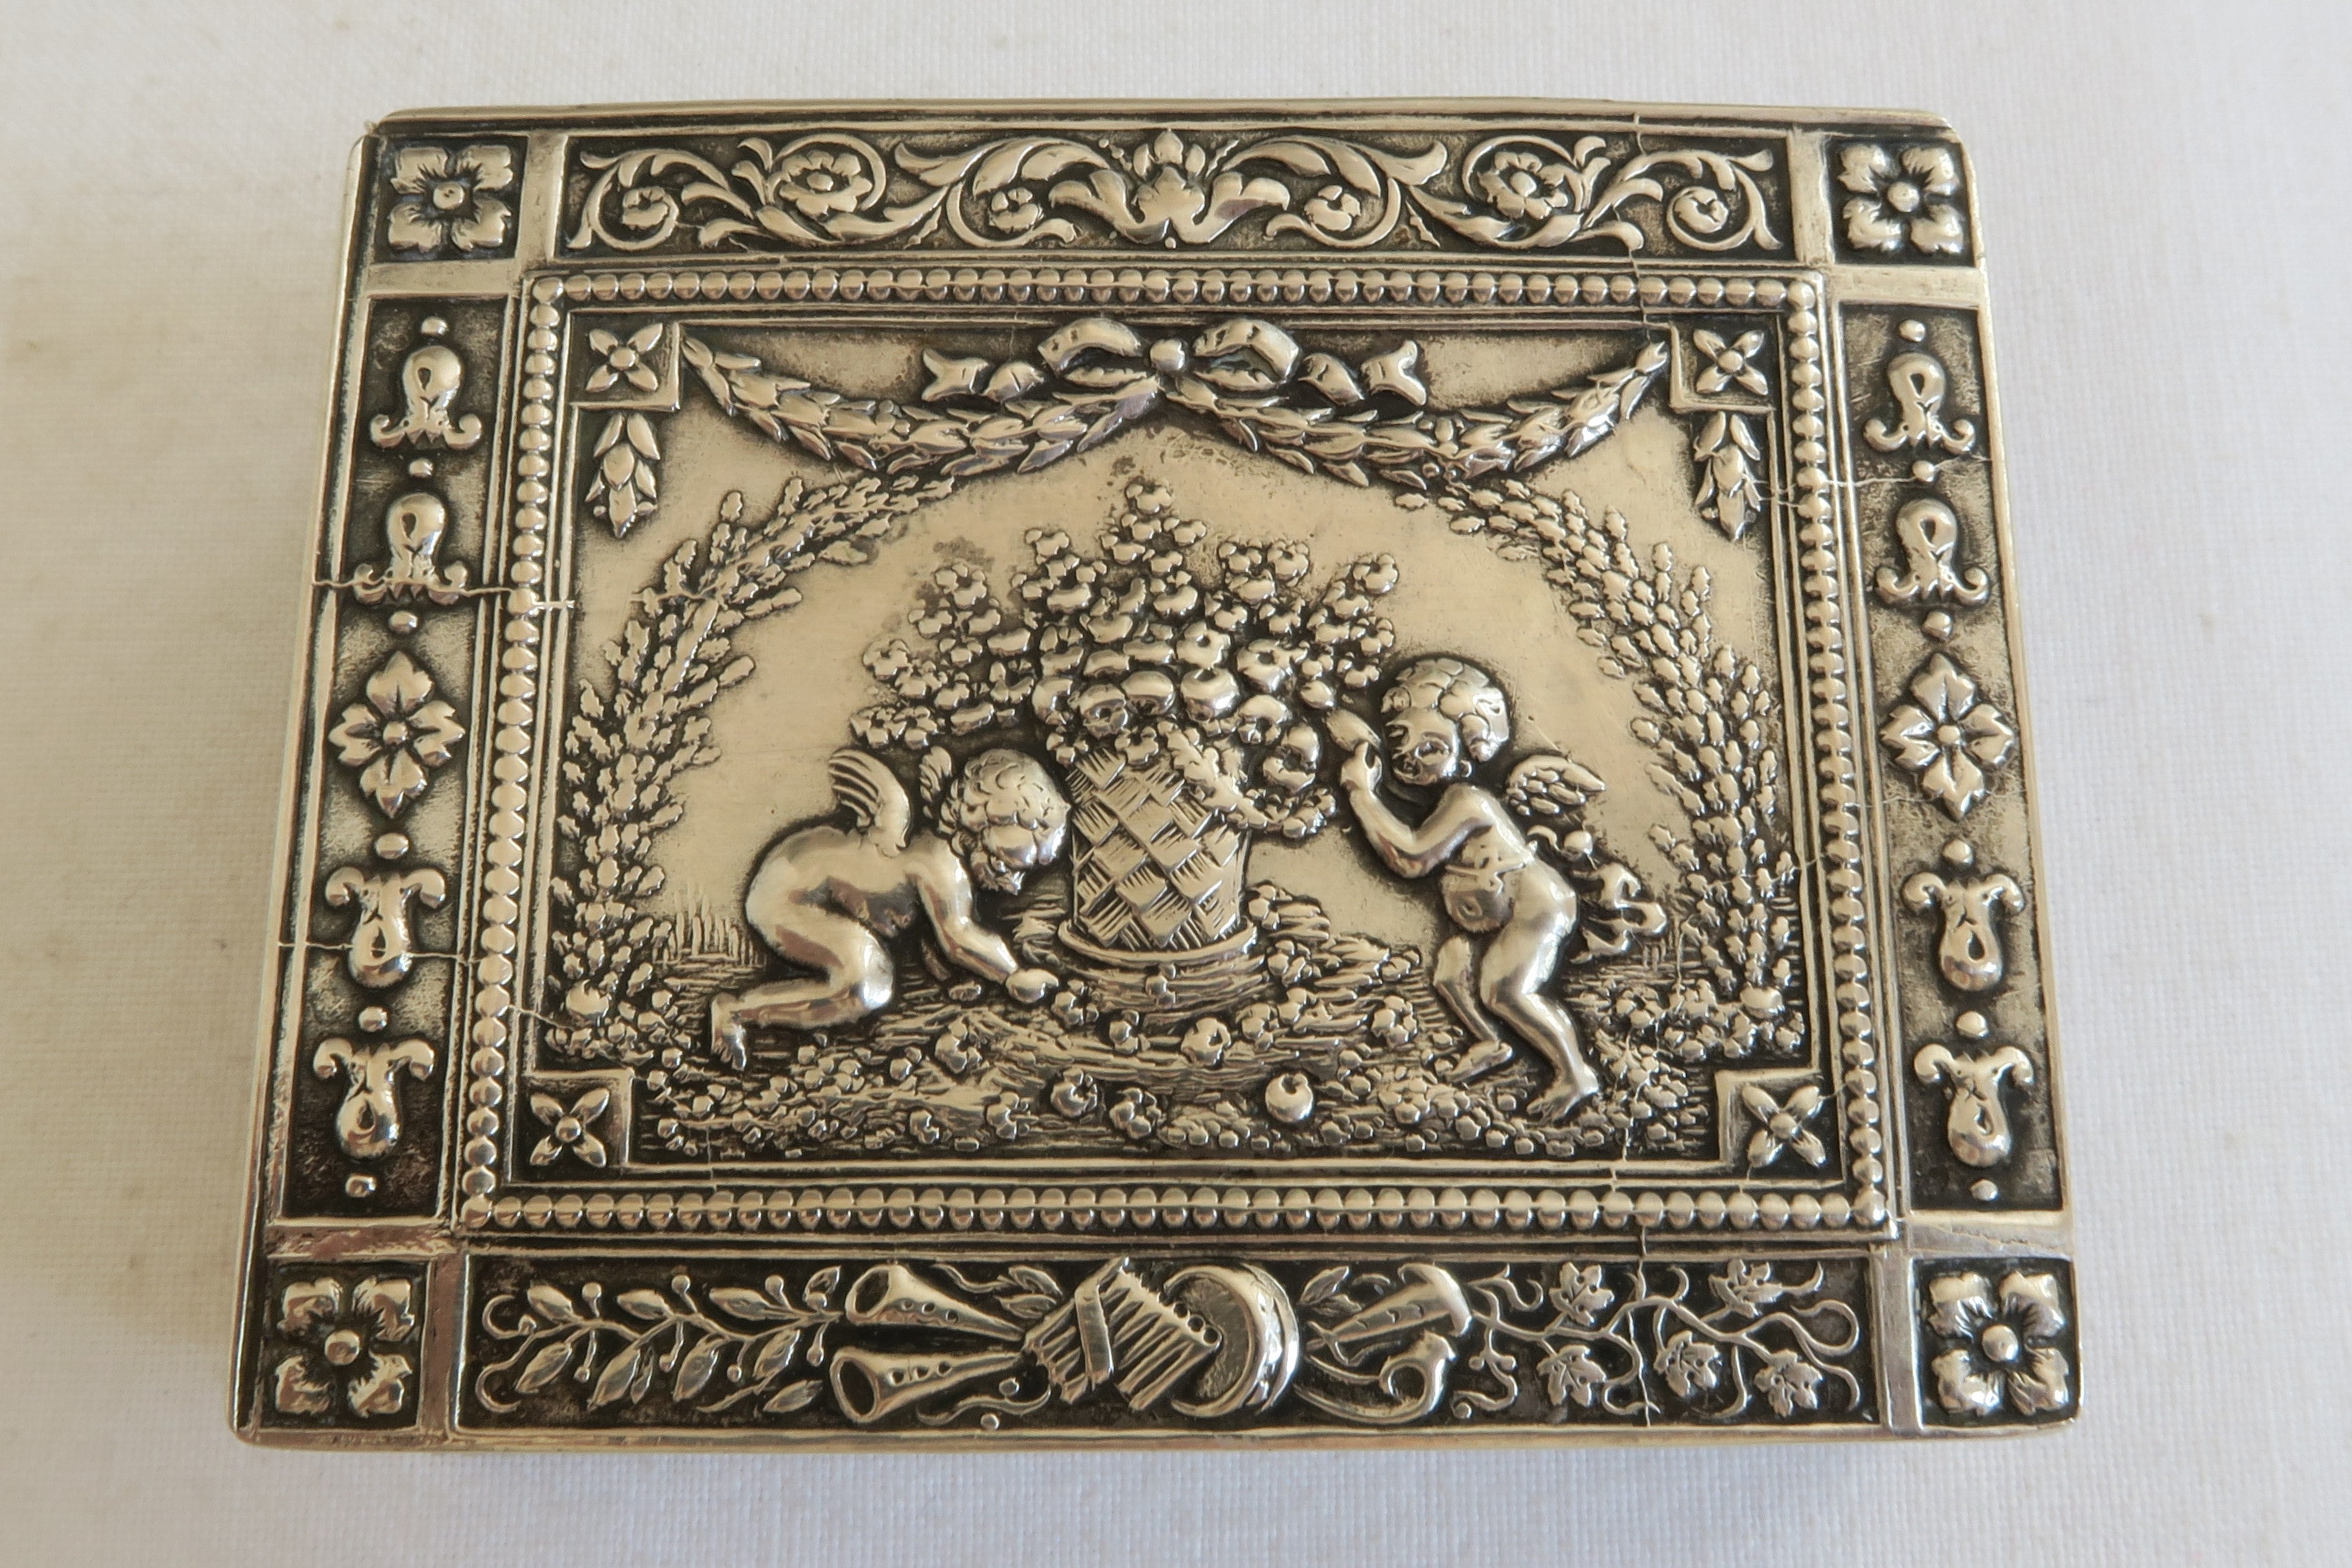 This beautiful snuff box is made from sterling silver. The lid and sides are covered in an intricate floral design with musical instruments and a scene of two playing cherubs in its center. The richly embellished box was manufactured in Germany and